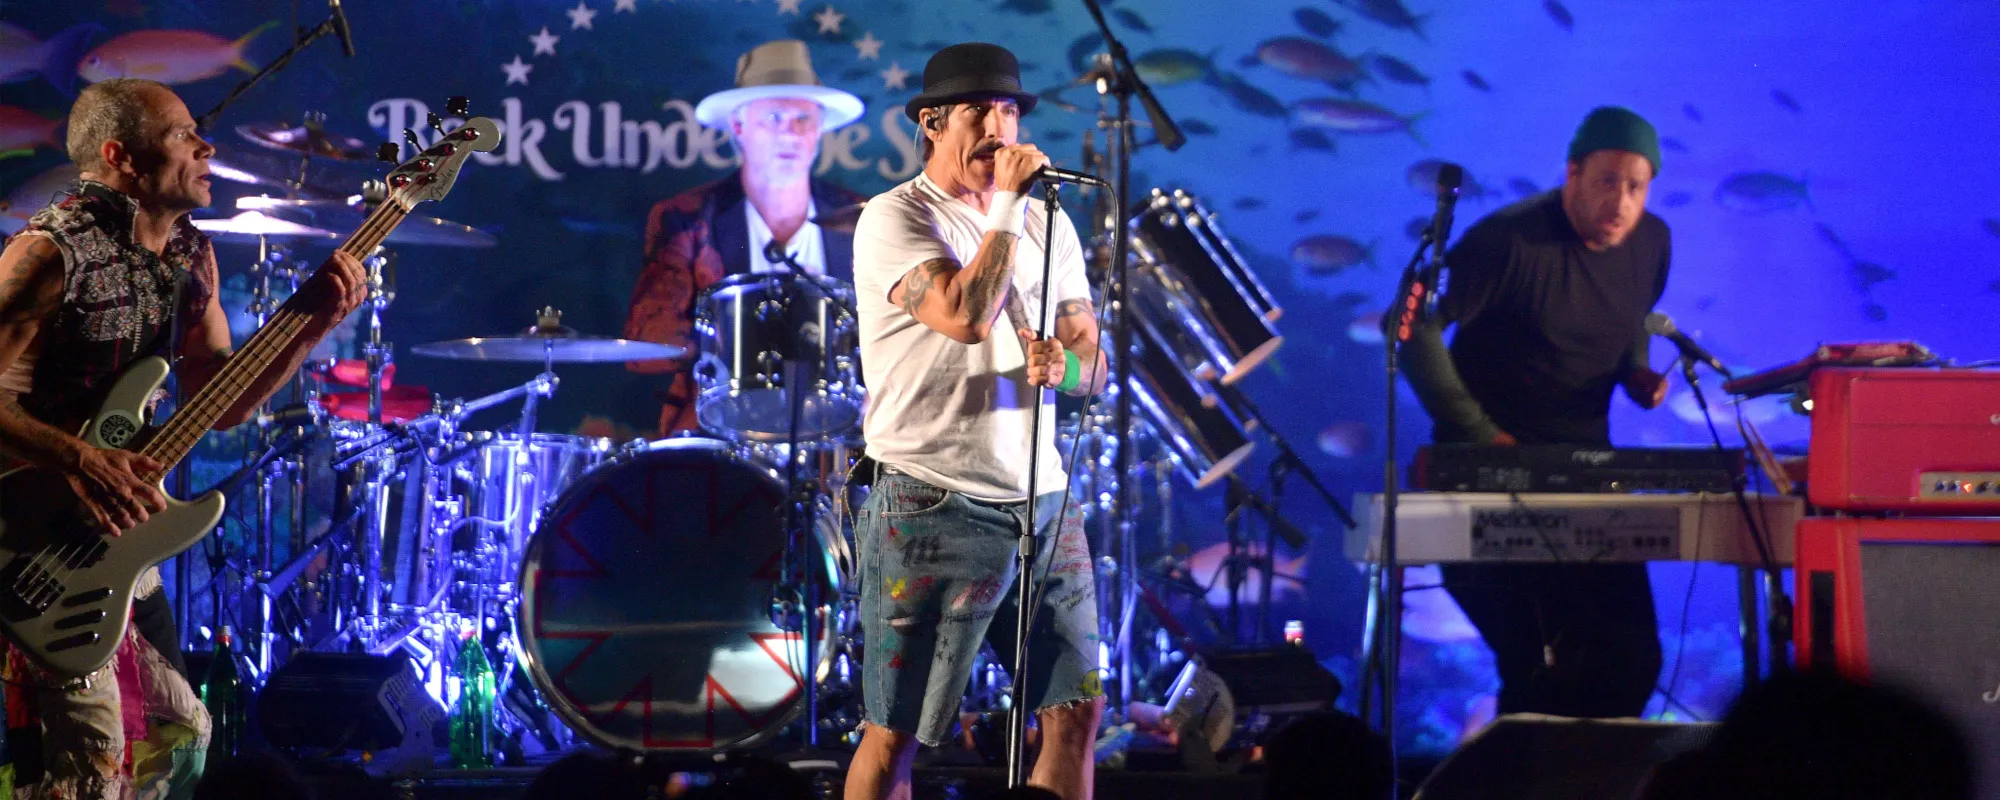 Watch: Red Hot Chili Peppers Play the Apollo Theater for the First Time